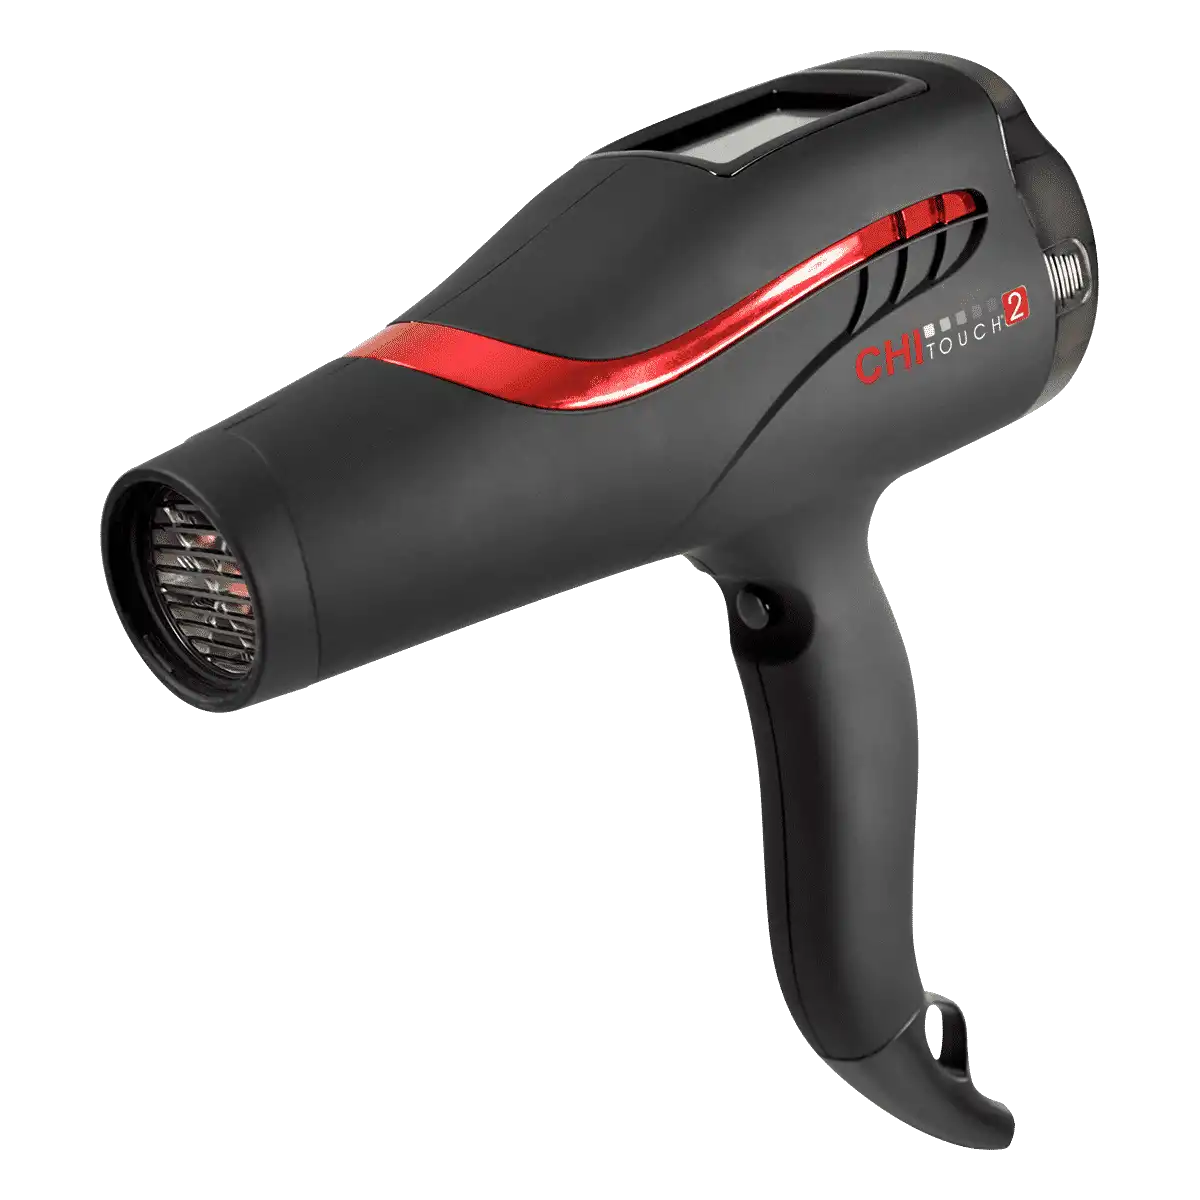 CHI Touch 2 Hair Dryer